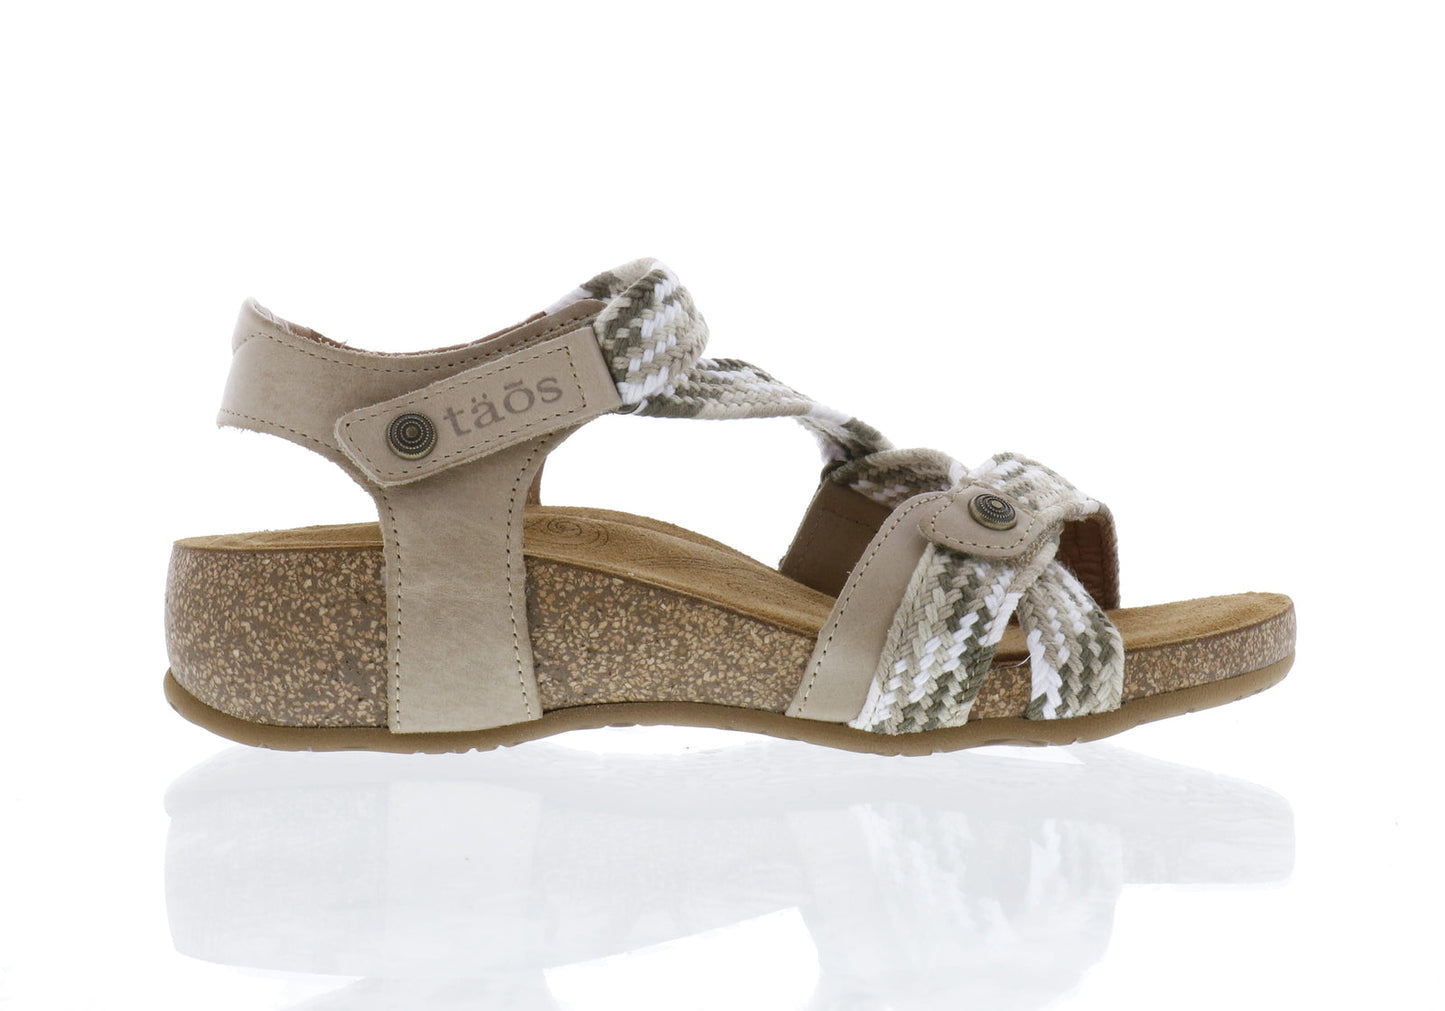 TRULIE Stone Multi | at Brandy's shoes